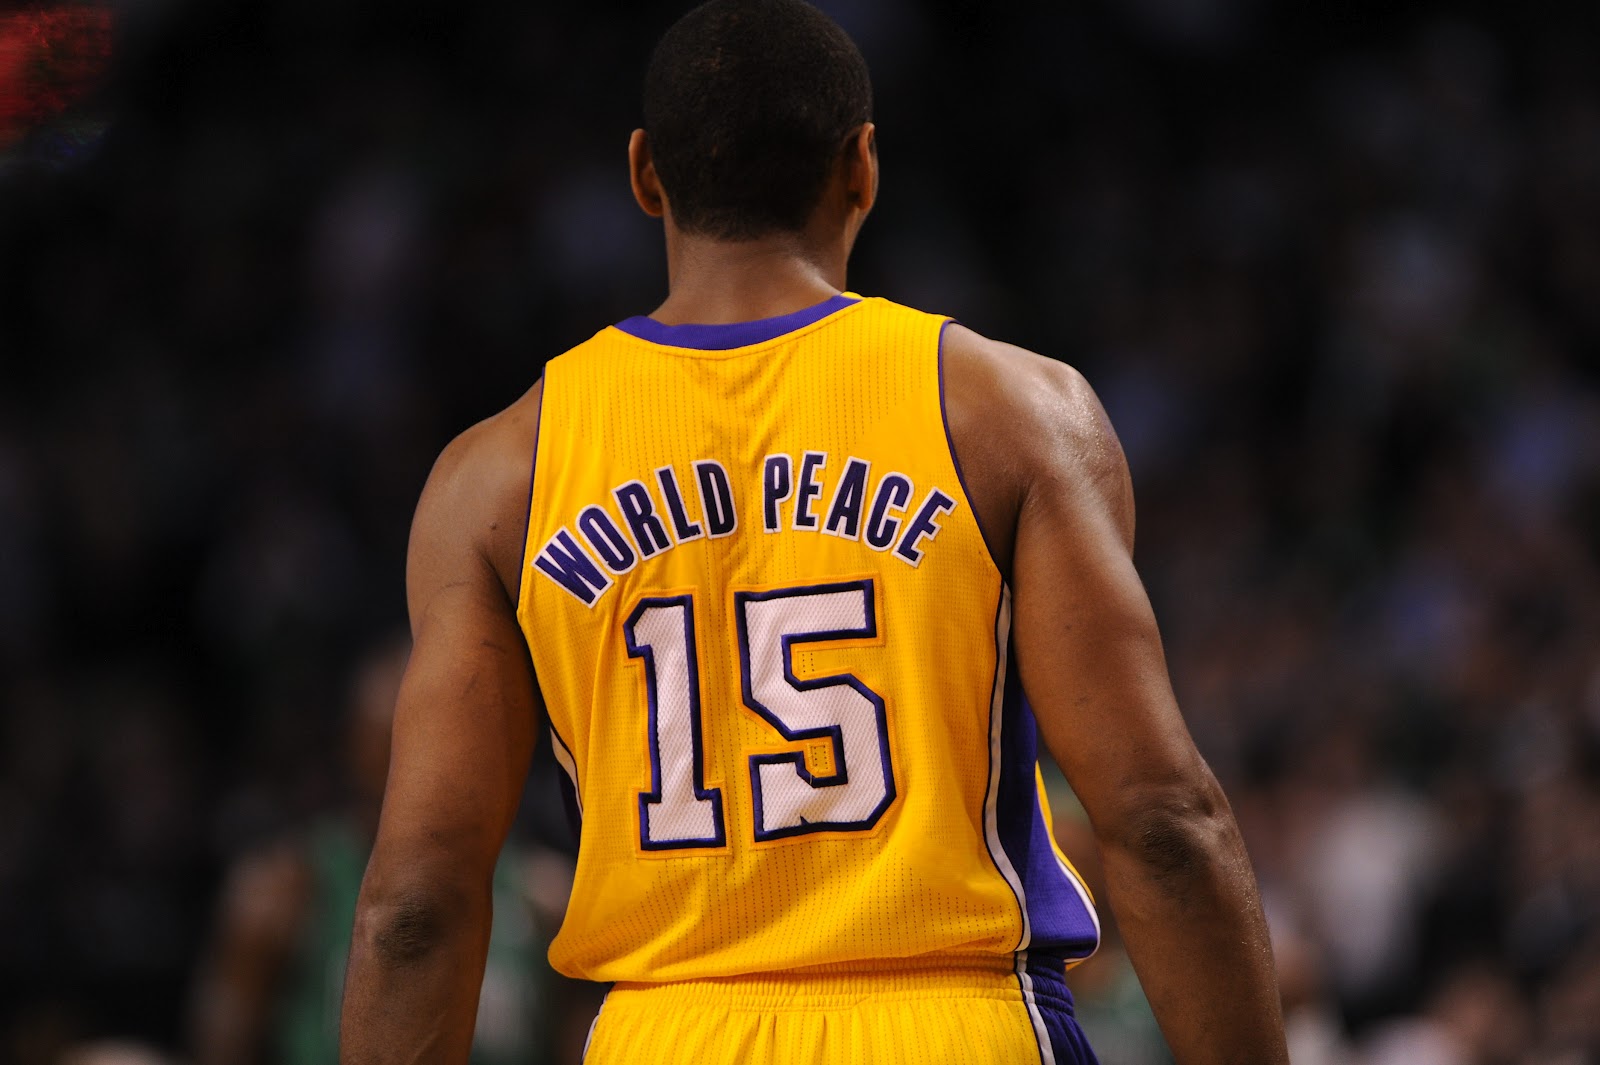 Lakers embrace Metta World Peace in crunchtime of 110-109 win over